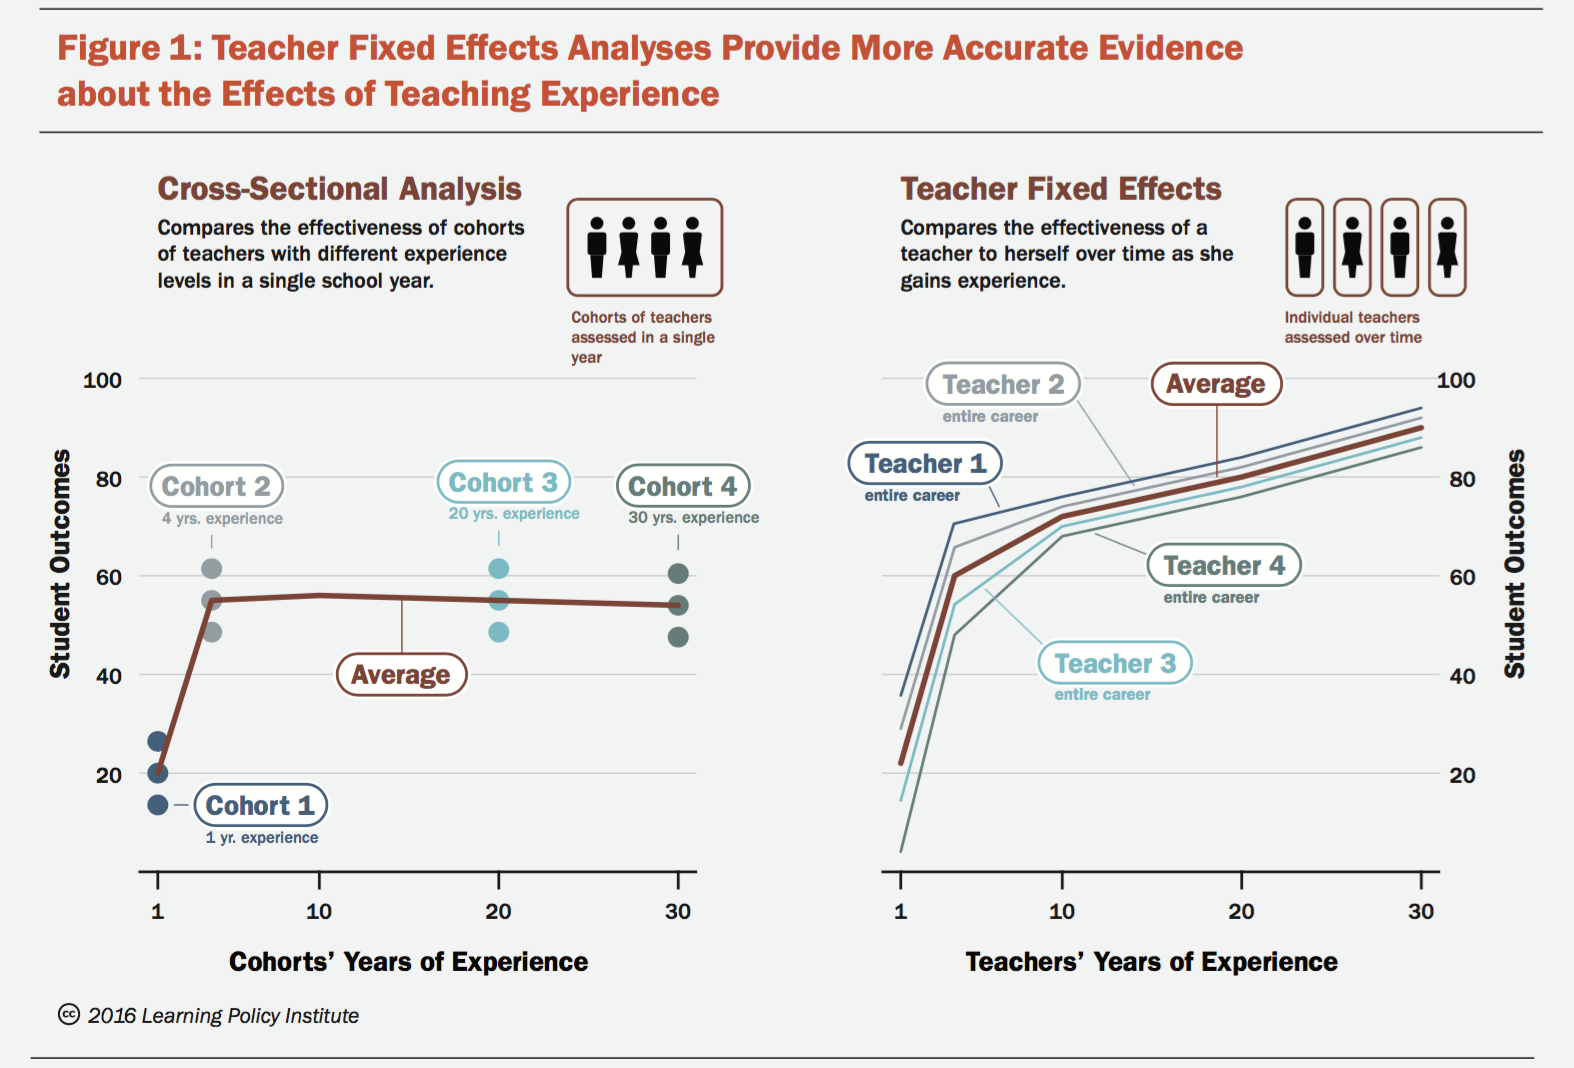 Previous research often used a “snapshot” approach to compare groups of teachers with different experience levels during a single school year, reflected in the graph on the left. More recent research has been more precise because it allows researchers to compare an individual teacher to him/herself over the course of a career (graph on the right).